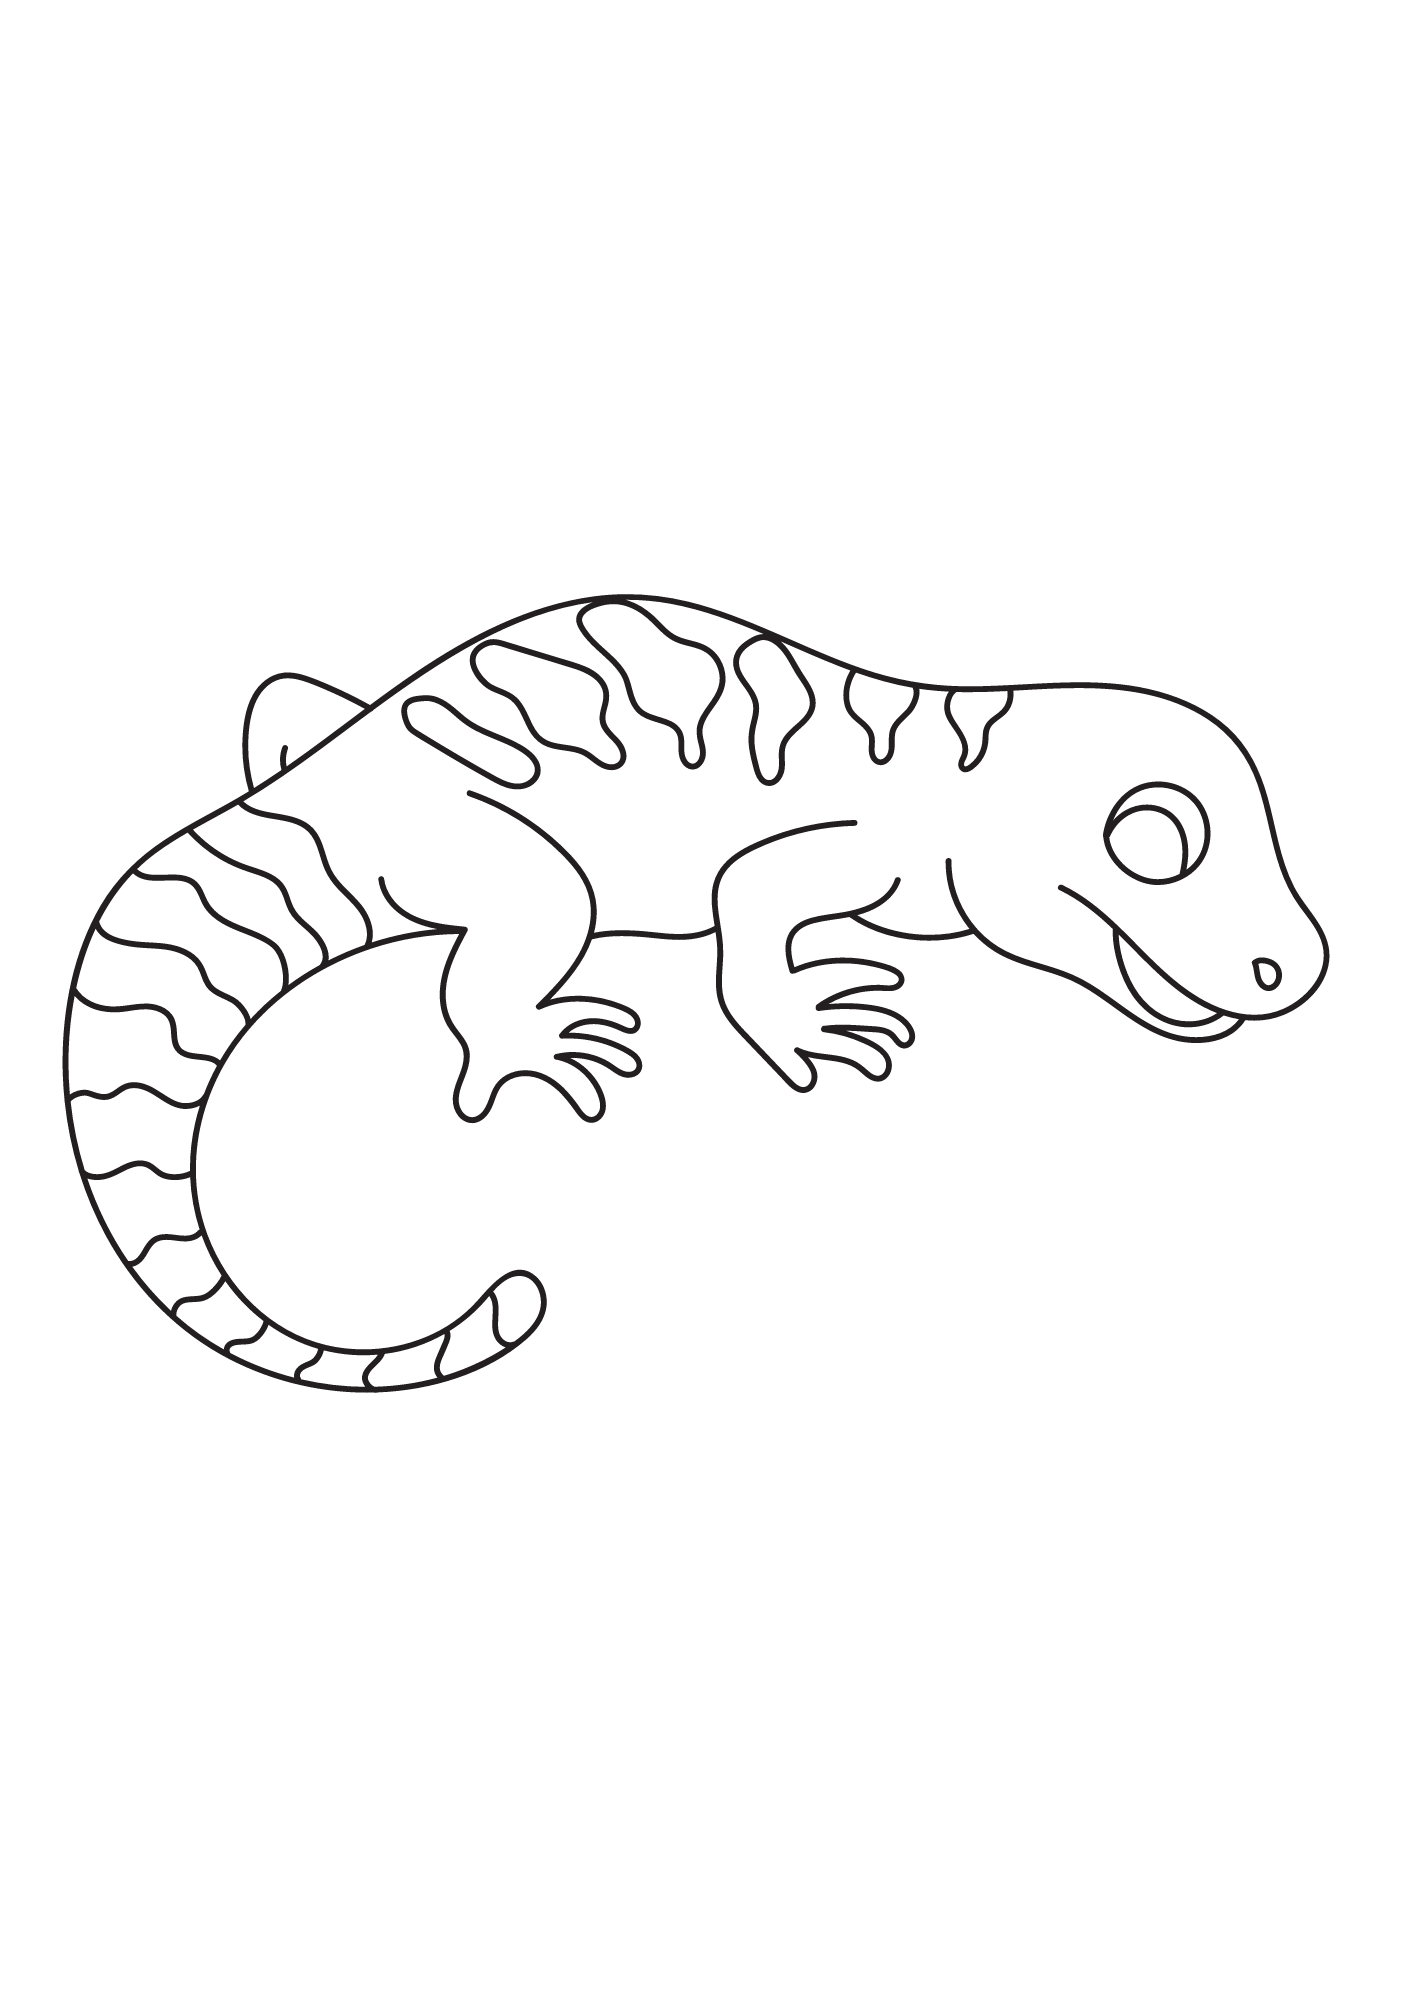 Newt Painting Coloring Page